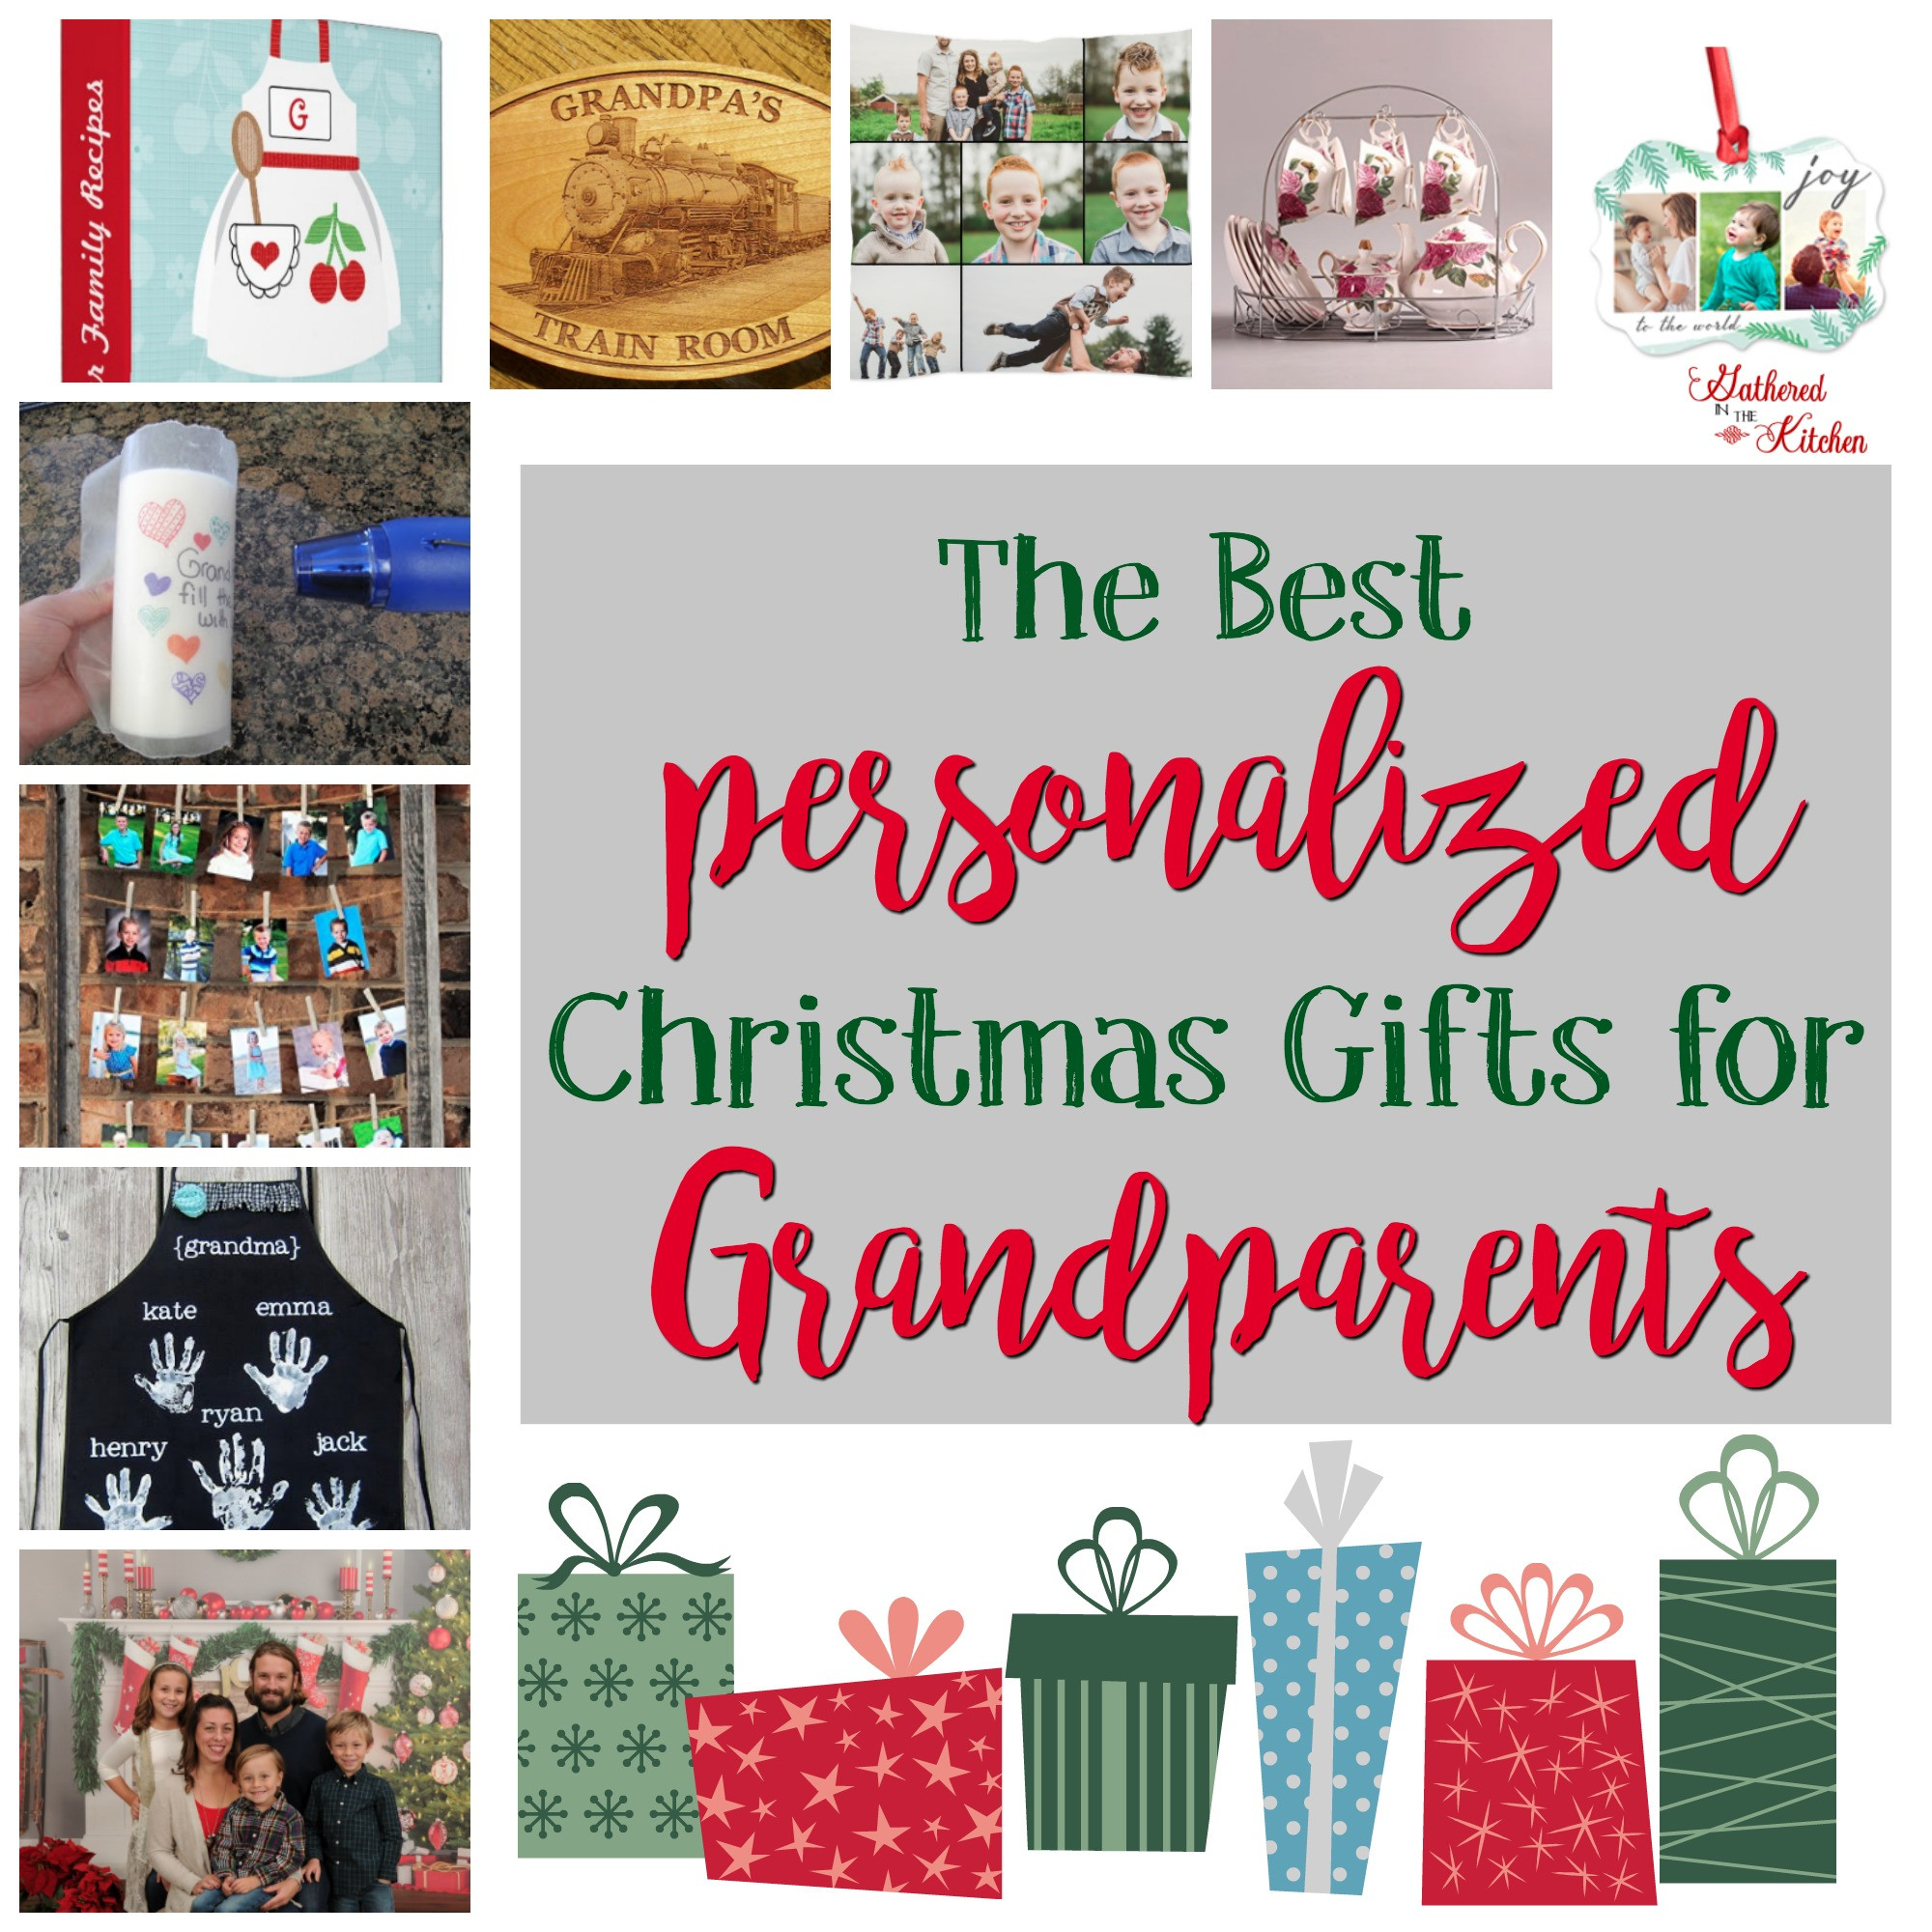 Great Gift Ideas For Grandfather
 Personalized Holiday Gifts for Grandparents Gathered In